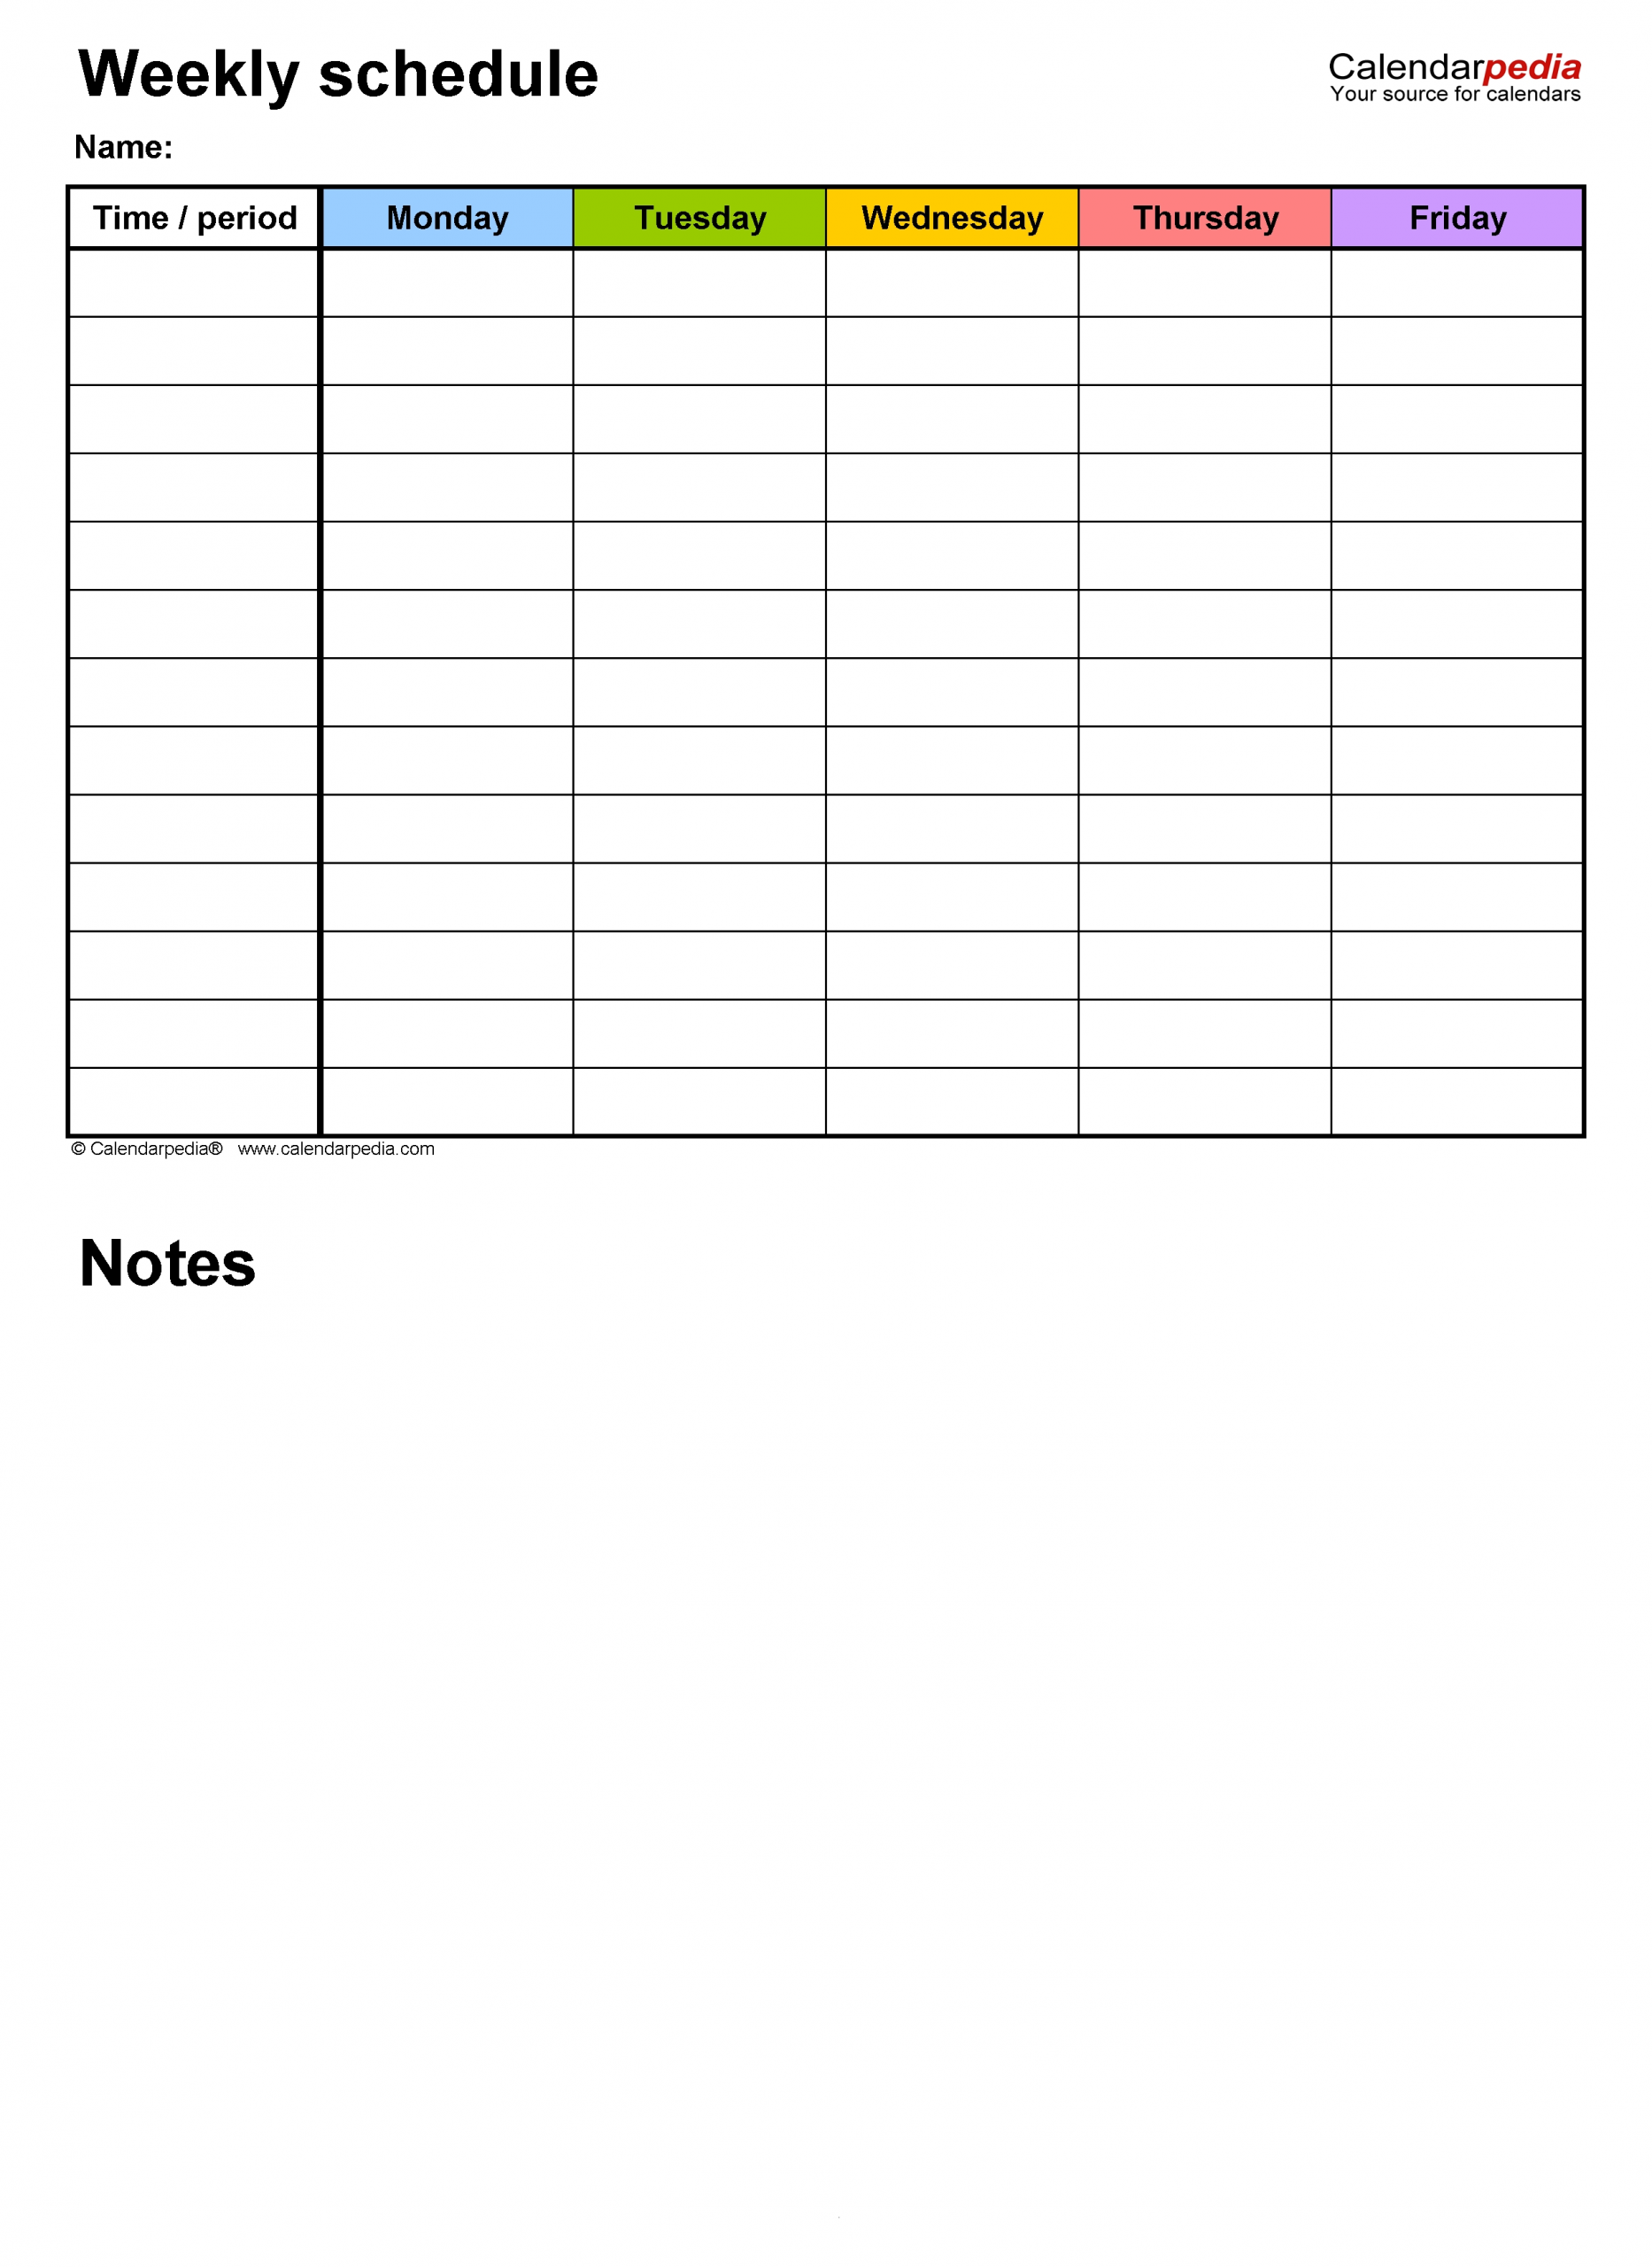 Free Weekly Schedule Templates For Pdf - 18 Templates inside Daily Schedule Printable Template Classroom